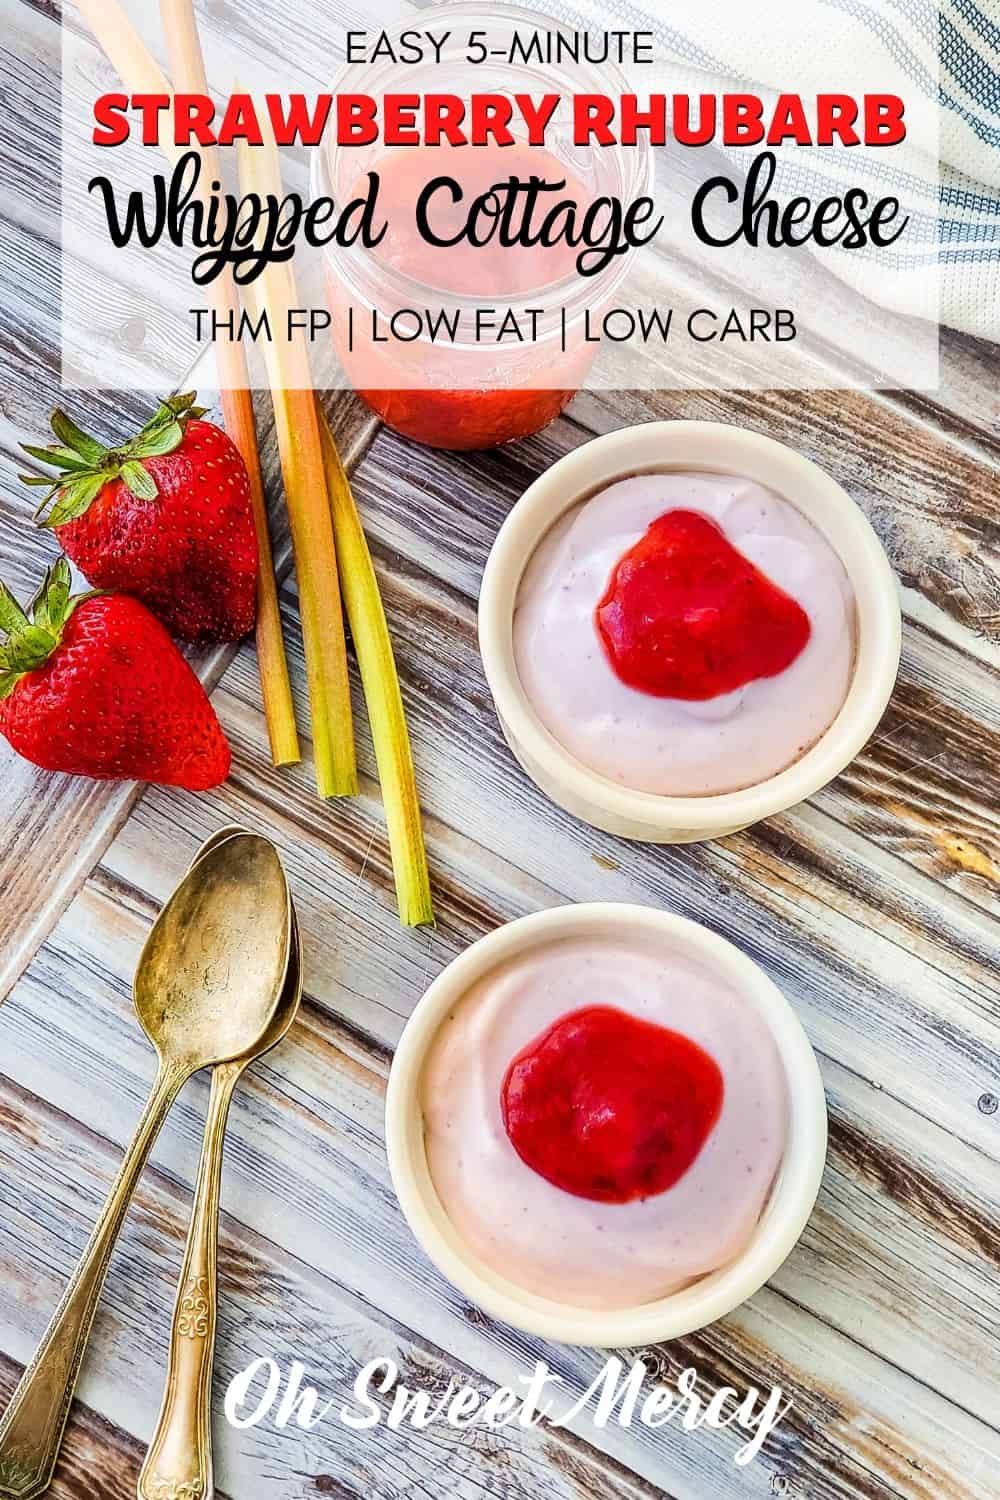 Need a quick low fat, low carb, THM FP snack or dessert? If you've got my Low Carb Strawberry Rhubarb Sauce on hand this creamy Strawberry Rhubarb Whipped Cottage Cheese takes just 5 minutes to make! Easy, healthy, and delicious! #strawberry #rhubarb #whippedcottagecheese #thmfp #thm #thmdesserts #thmsnacks #sugarfree #lowcarb #lowfat @ohsweetmercy